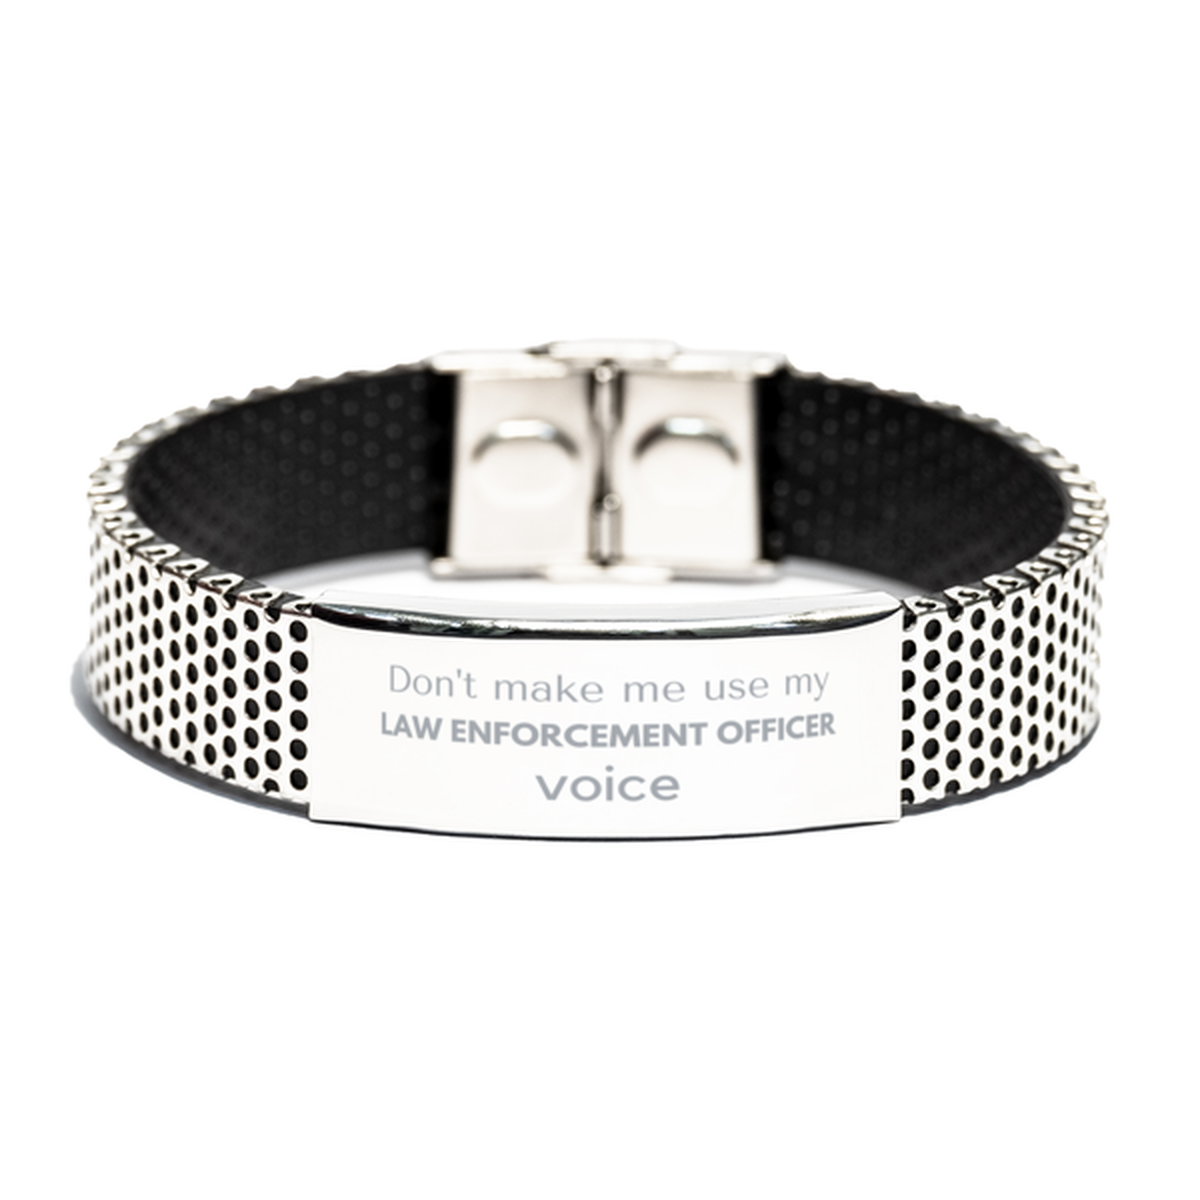 Don't make me use my Law Enforcement Officer voice, Sarcasm Law Enforcement Officer Gifts, Christmas Law Enforcement Officer Stainless Steel Bracelet Birthday Unique Gifts For Law Enforcement Officer Coworkers, Men, Women, Colleague, Friends